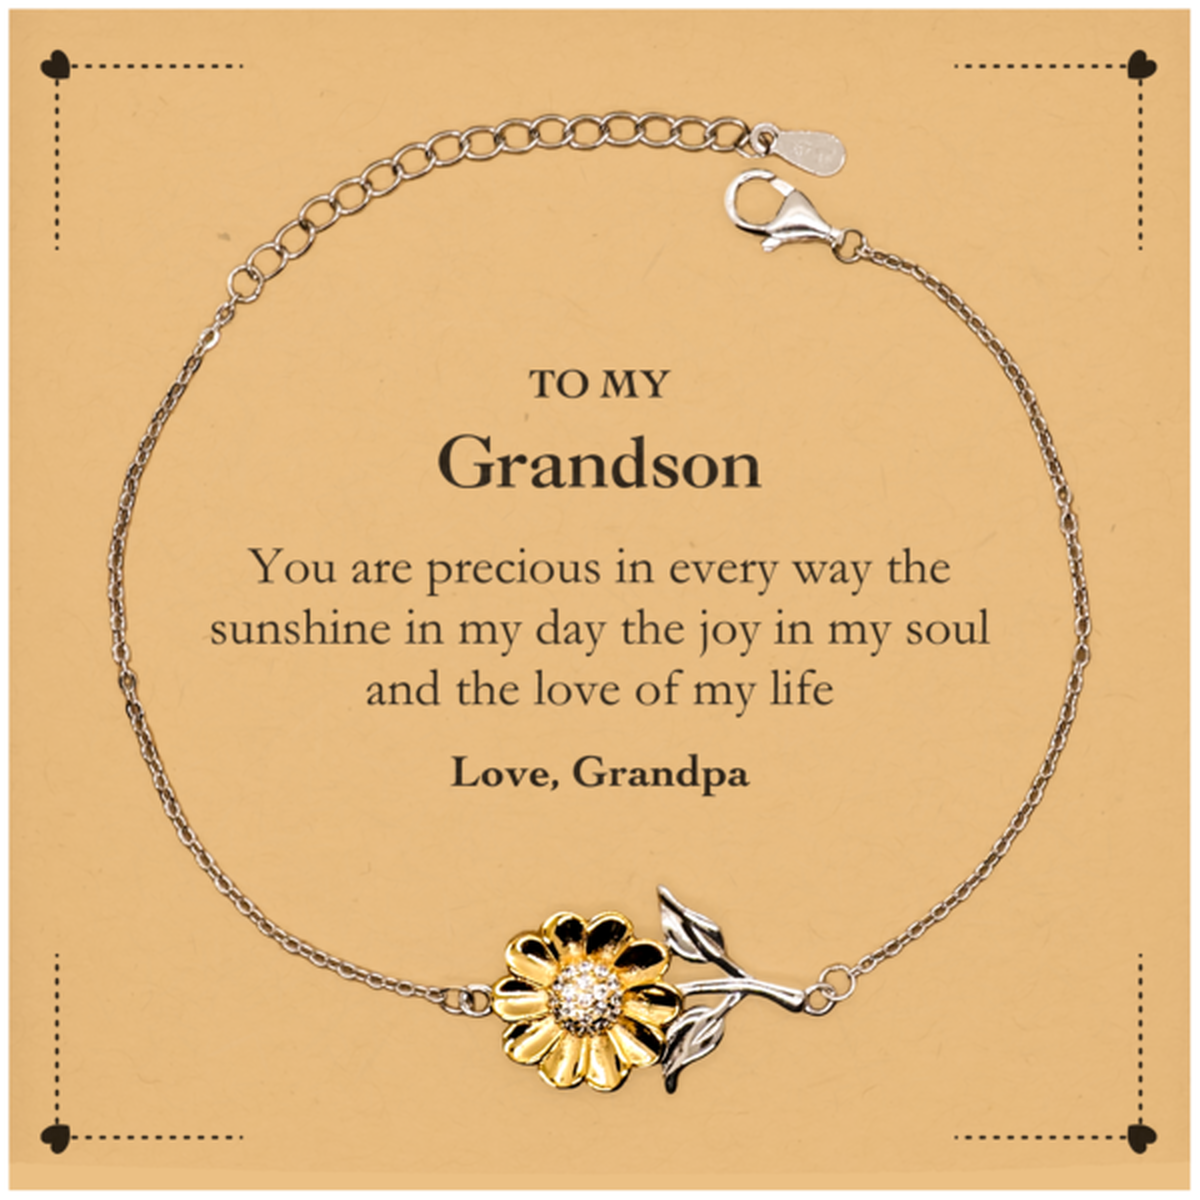 Graduation Gifts for Grandson Sunflower Bracelet Present from Grandpa, Christmas Grandson Birthday Gifts Grandson You are precious in every way the sunshine in my day. Love, Grandpa